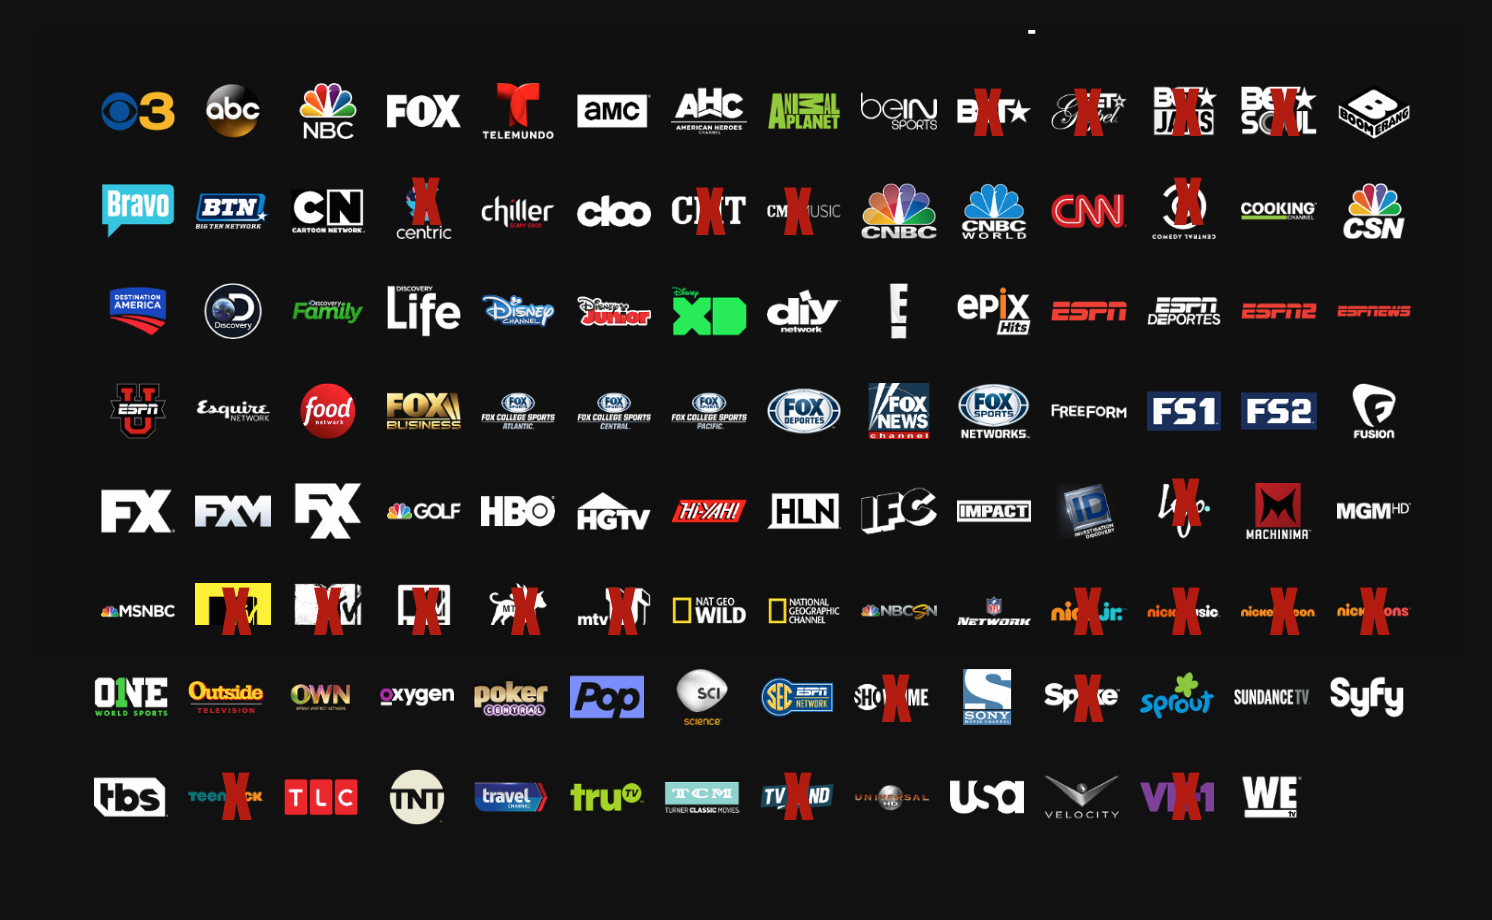 PlayStation Vue Ditches Comedy Central, MTV, Nickelodeon, Spike, BET, CMT & Many More